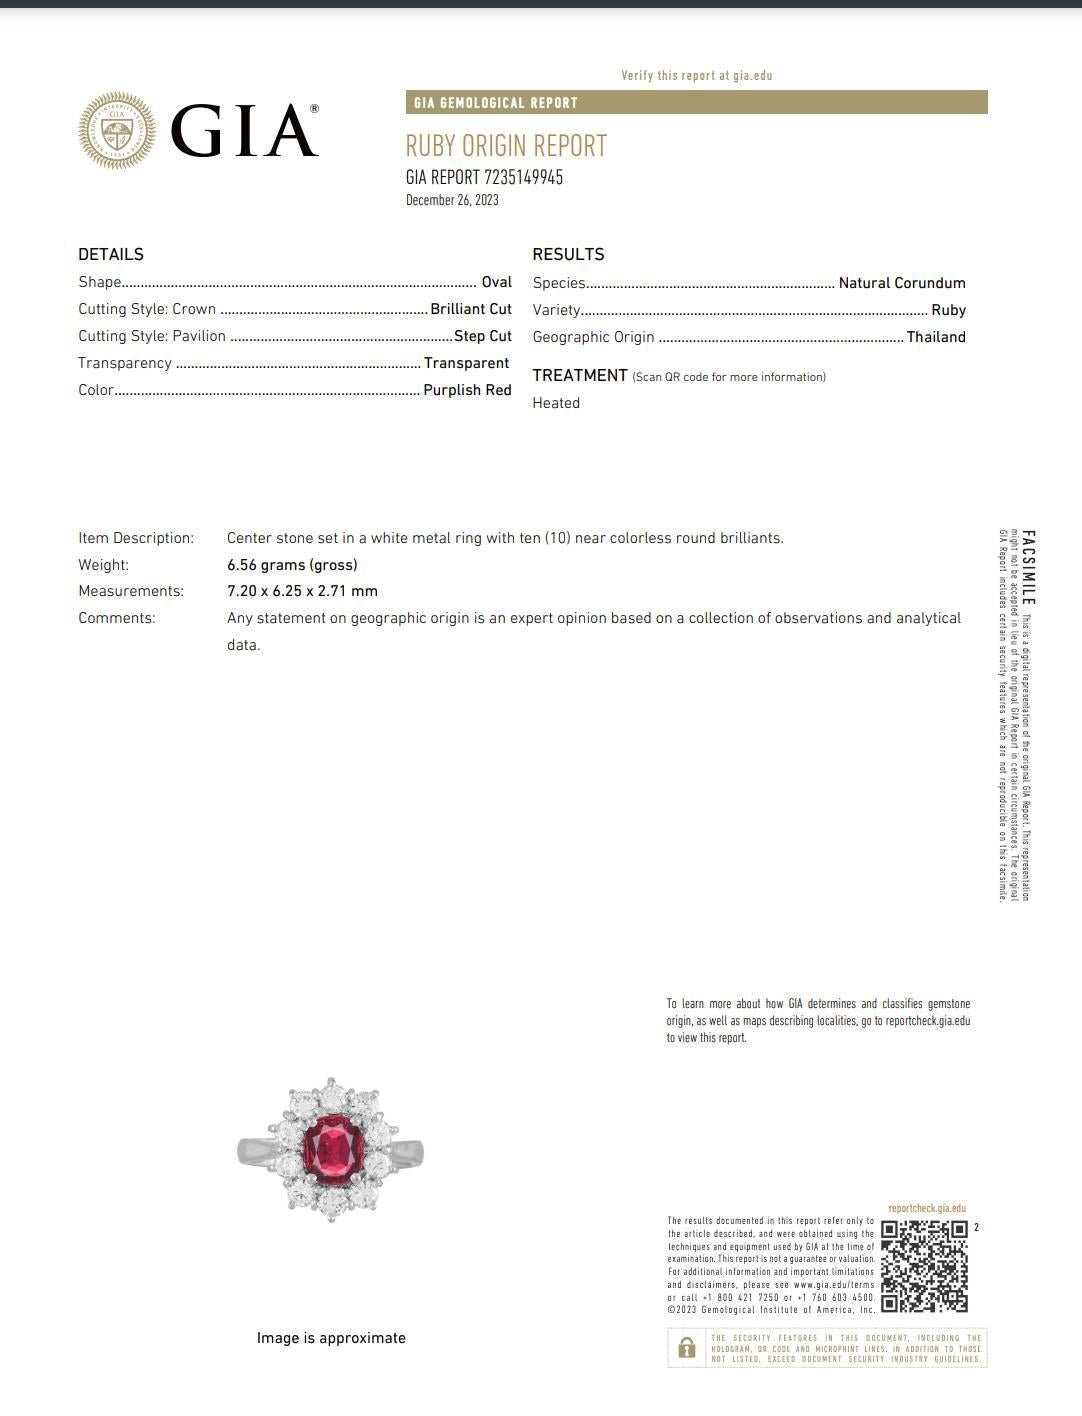 GIA Certified 18 Karat White Gold Natural Ruby & Diamond Halo Cocktail Ring 

GIA report number: 7235149945
Metal: 18k white gold
Weight: 6.56 grams
Diamonds: Approx. 1.00 carat natural round diamonds F-G VS 
Ruby: Approx. 1.00 carat natural ruby